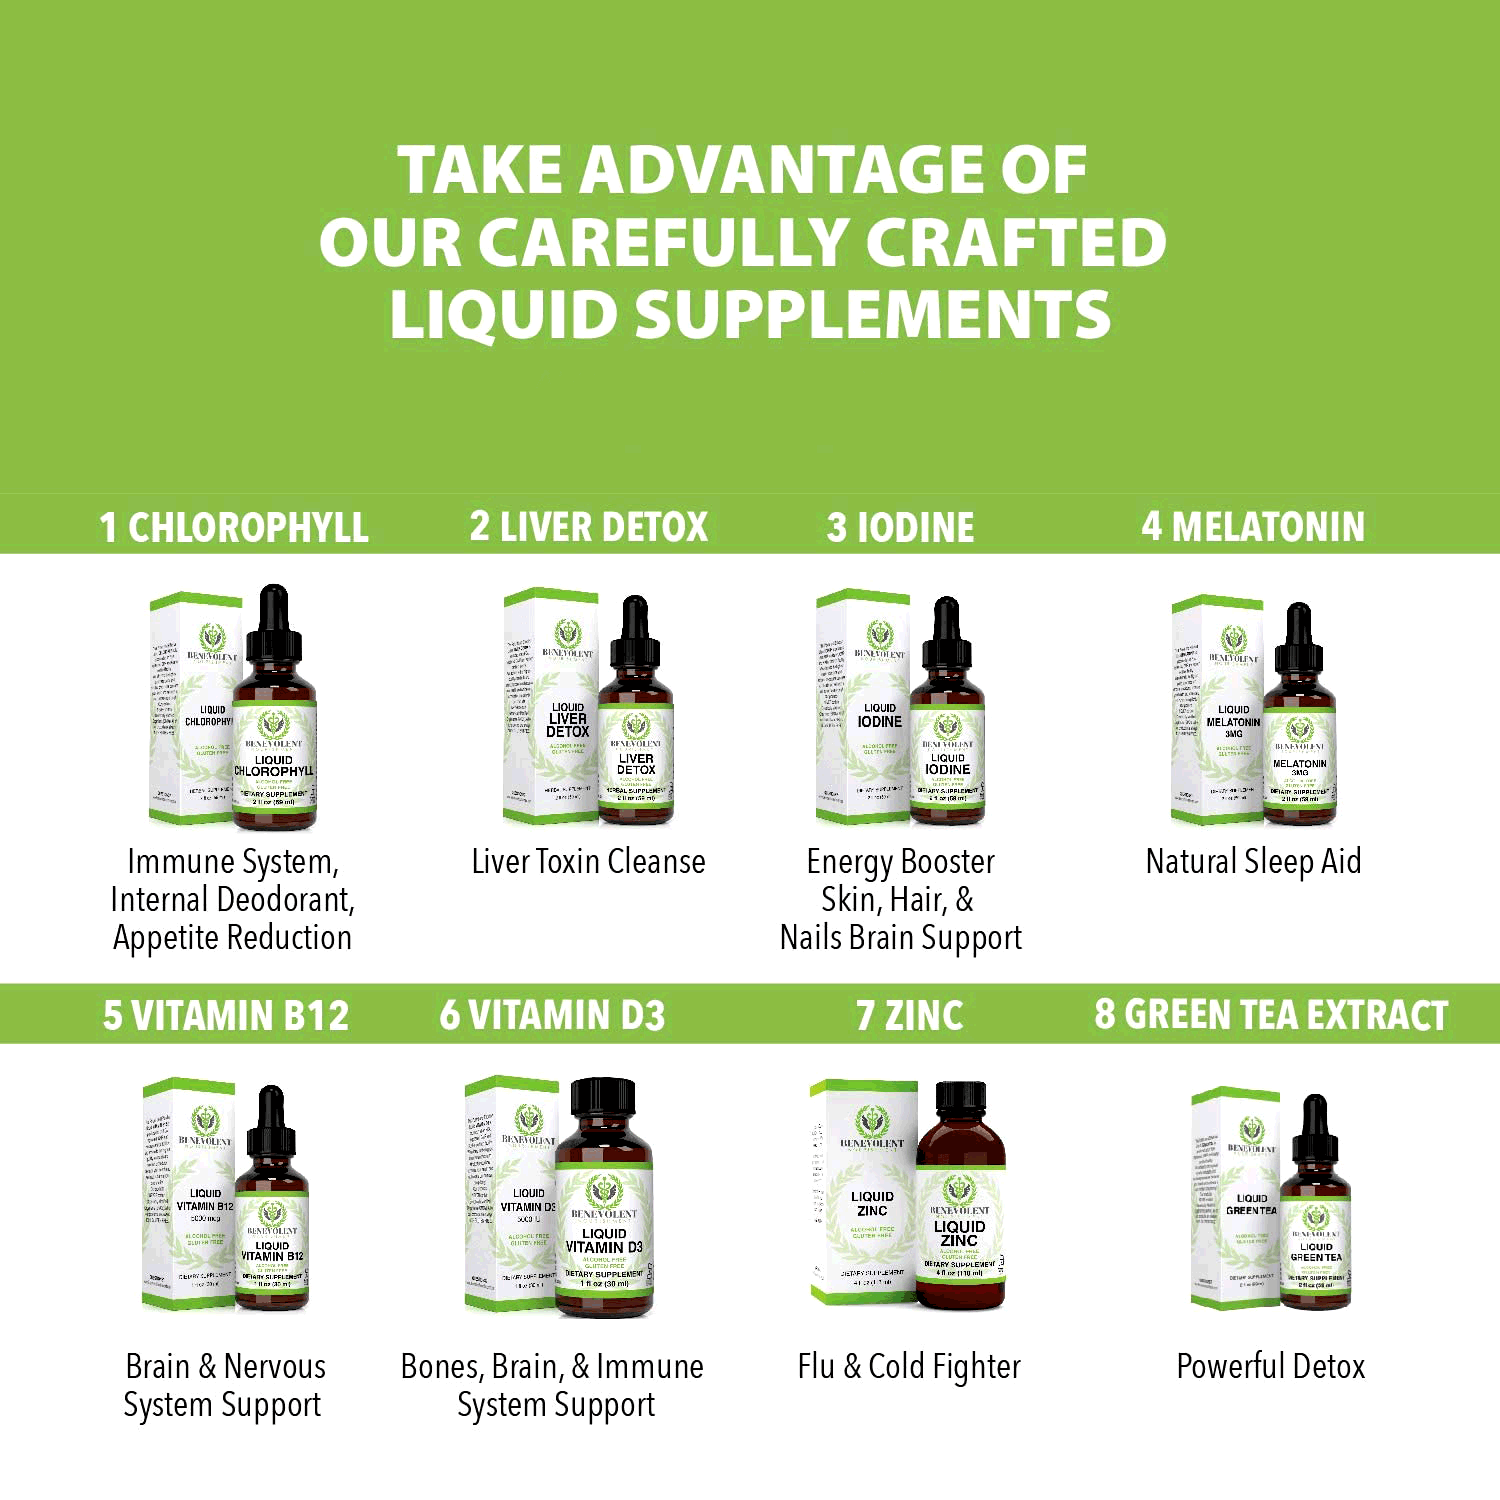 Take advantage of our liquid supplements